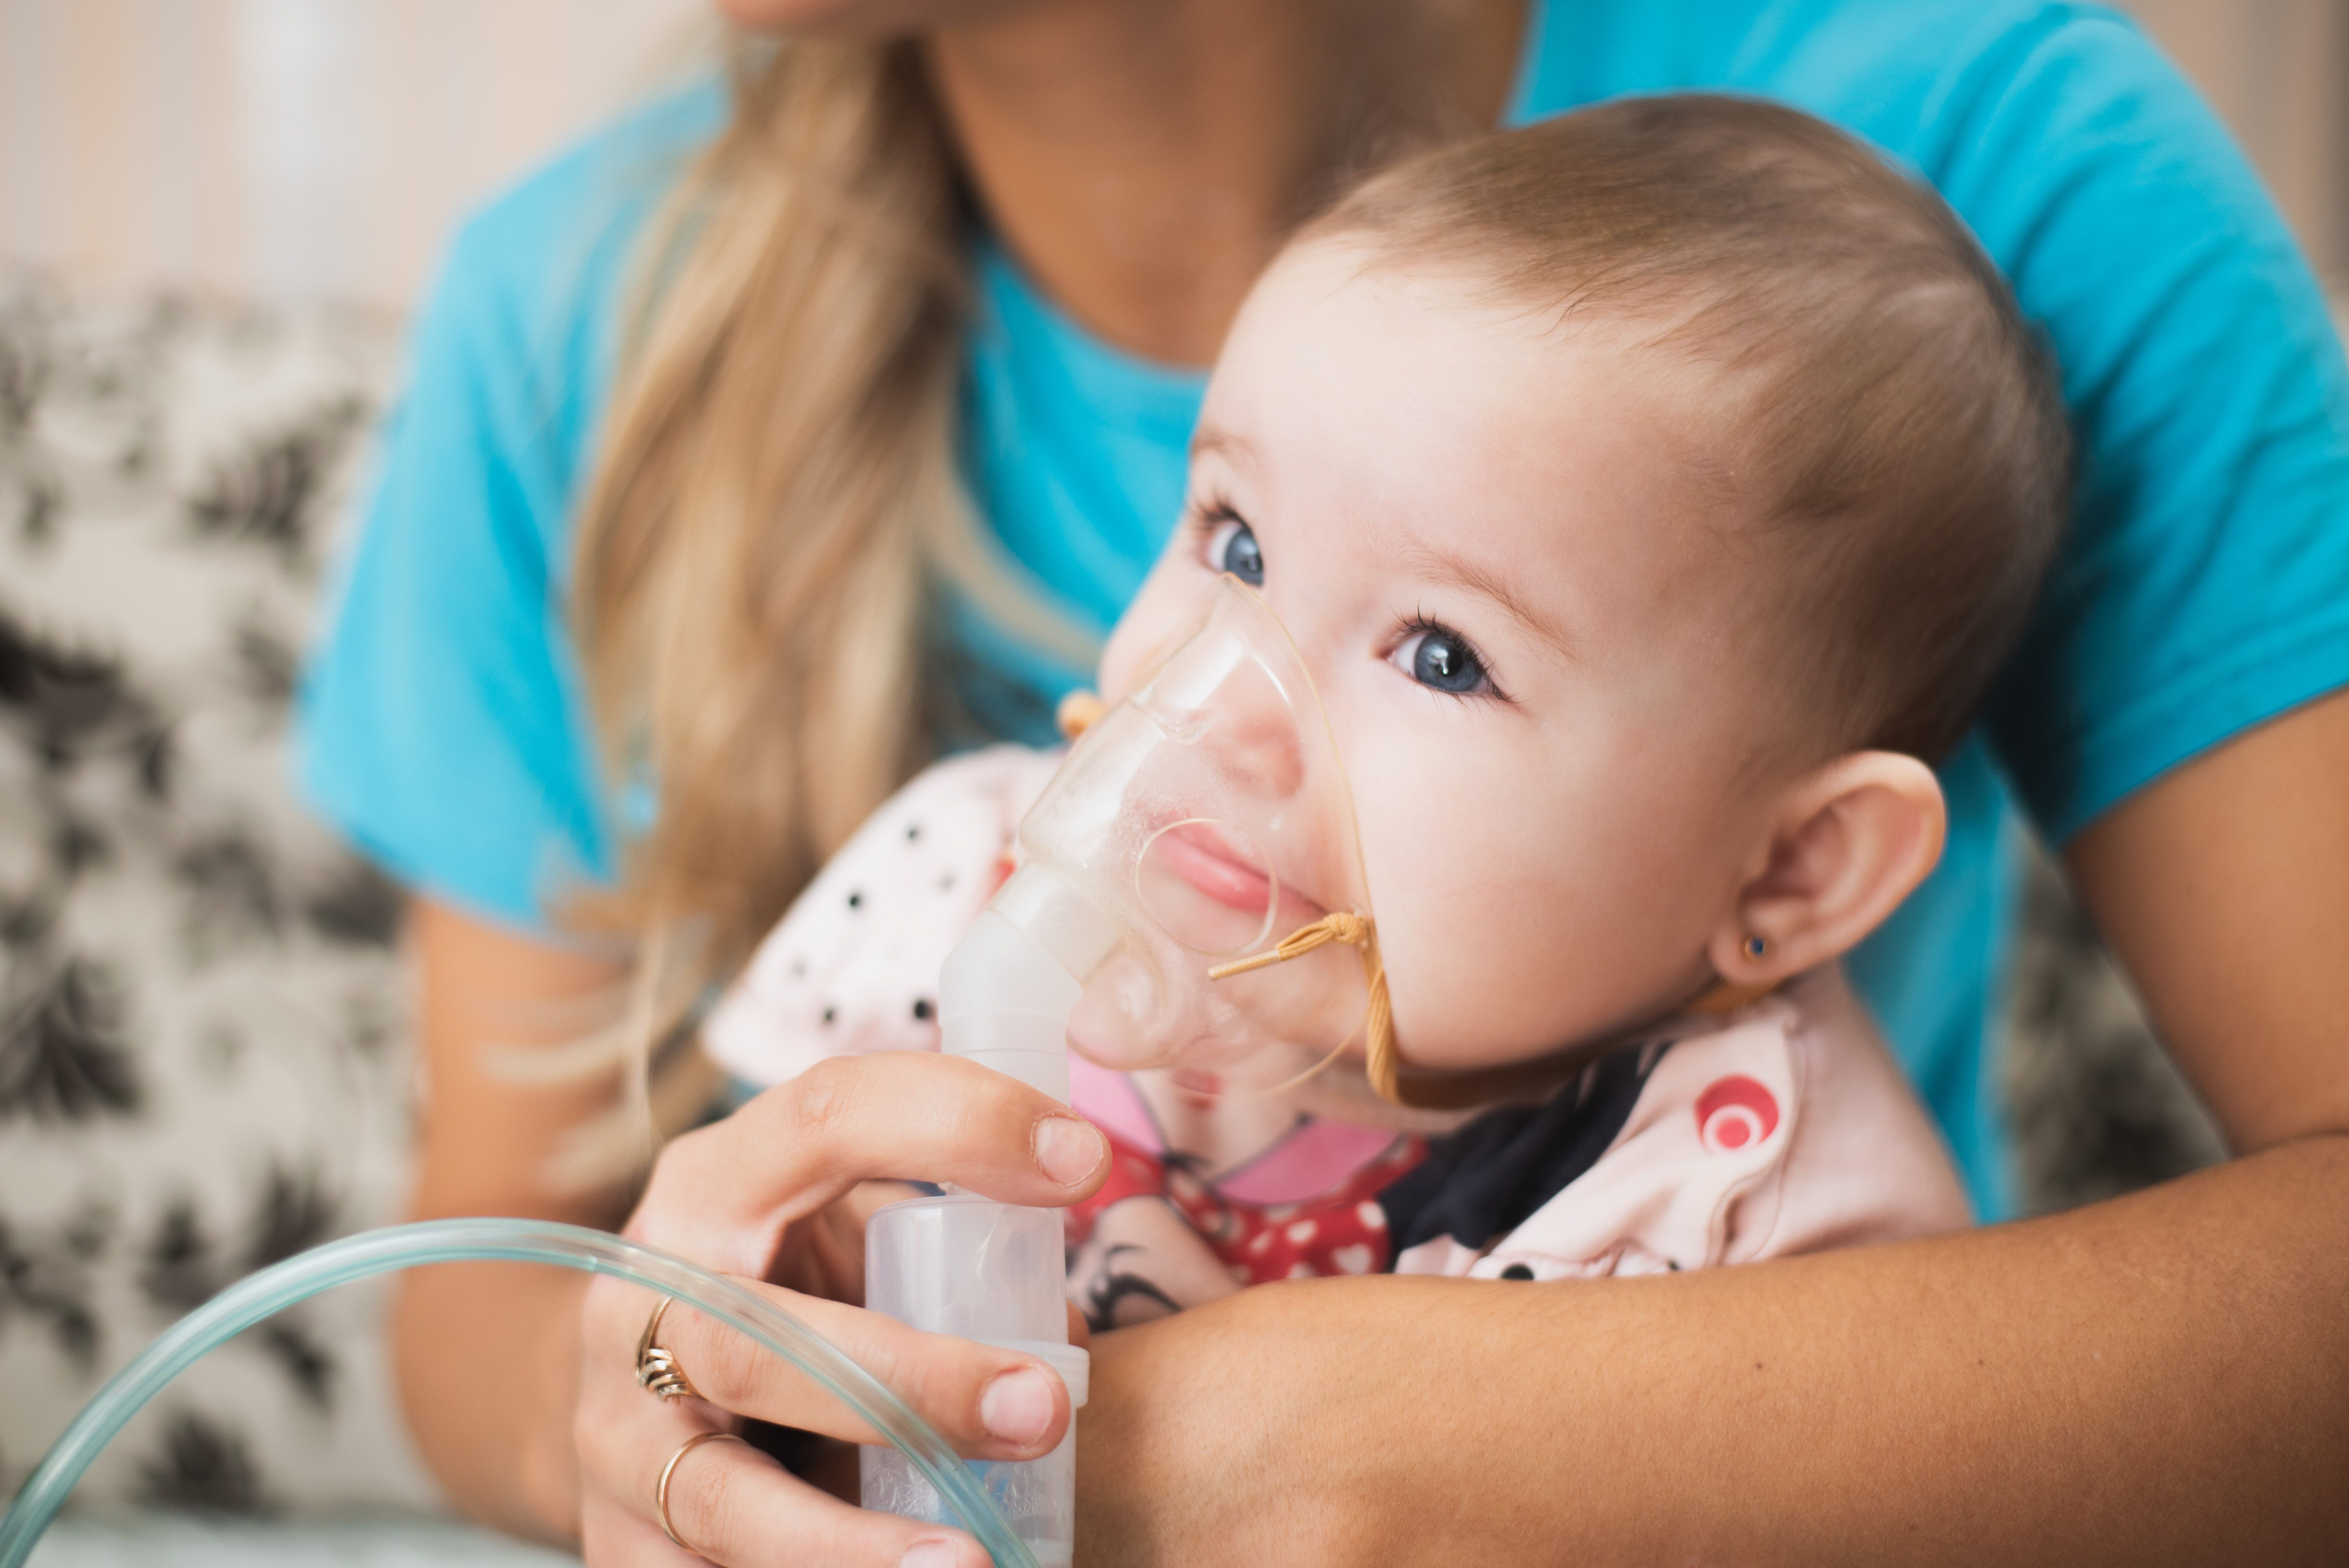 A single-dose injection of nirsevimab before RSV season was proven to reduce infants’ risk of lower respiratory tract infection by 74.5%.